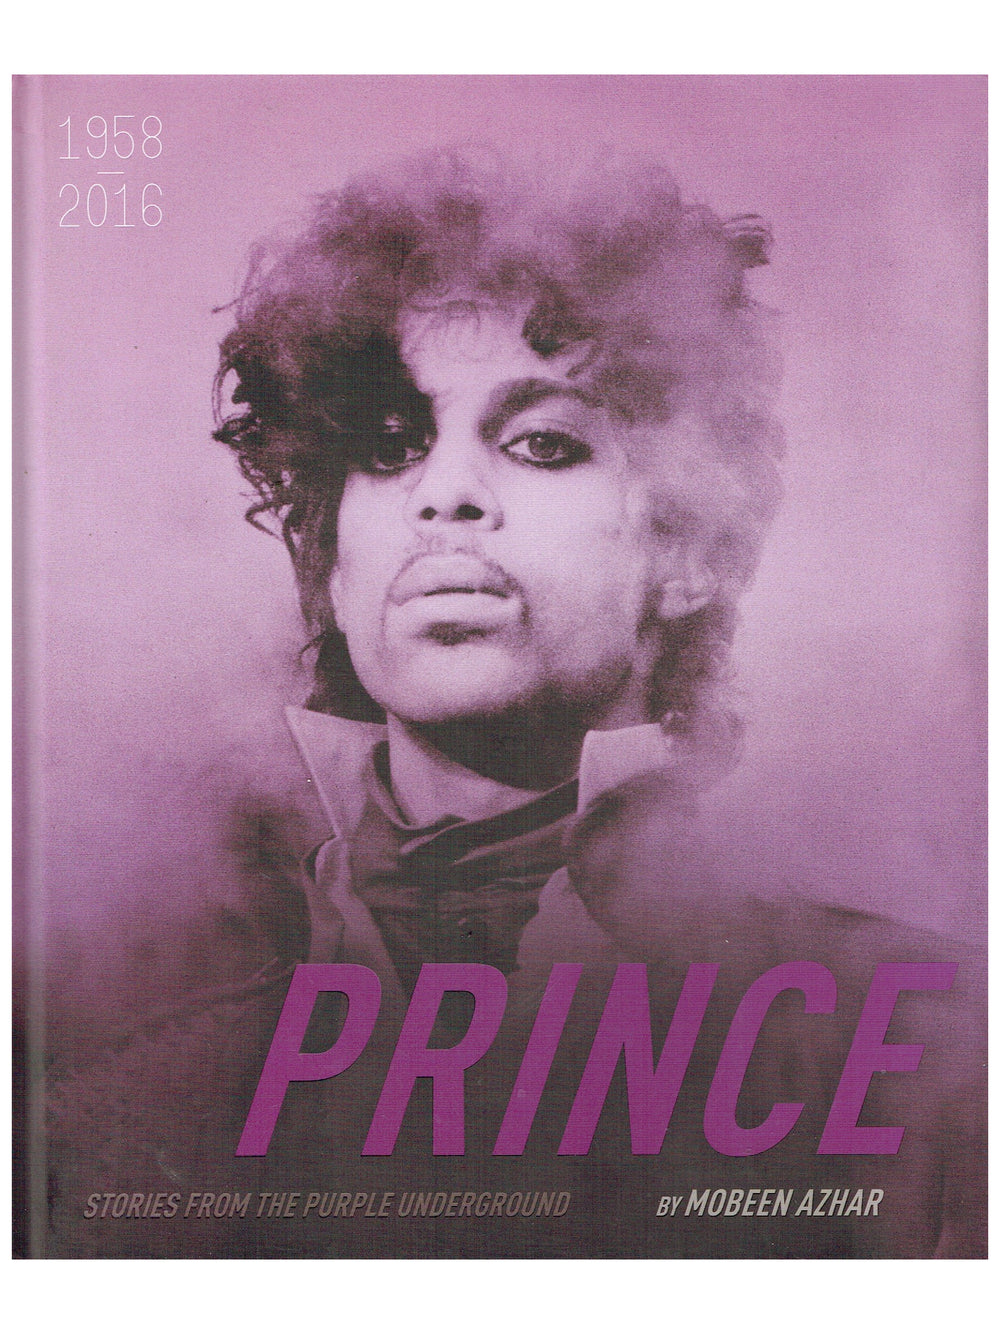 Prince – by Mobeen Azhar Stories From The Underground Hardback Book 144 pages